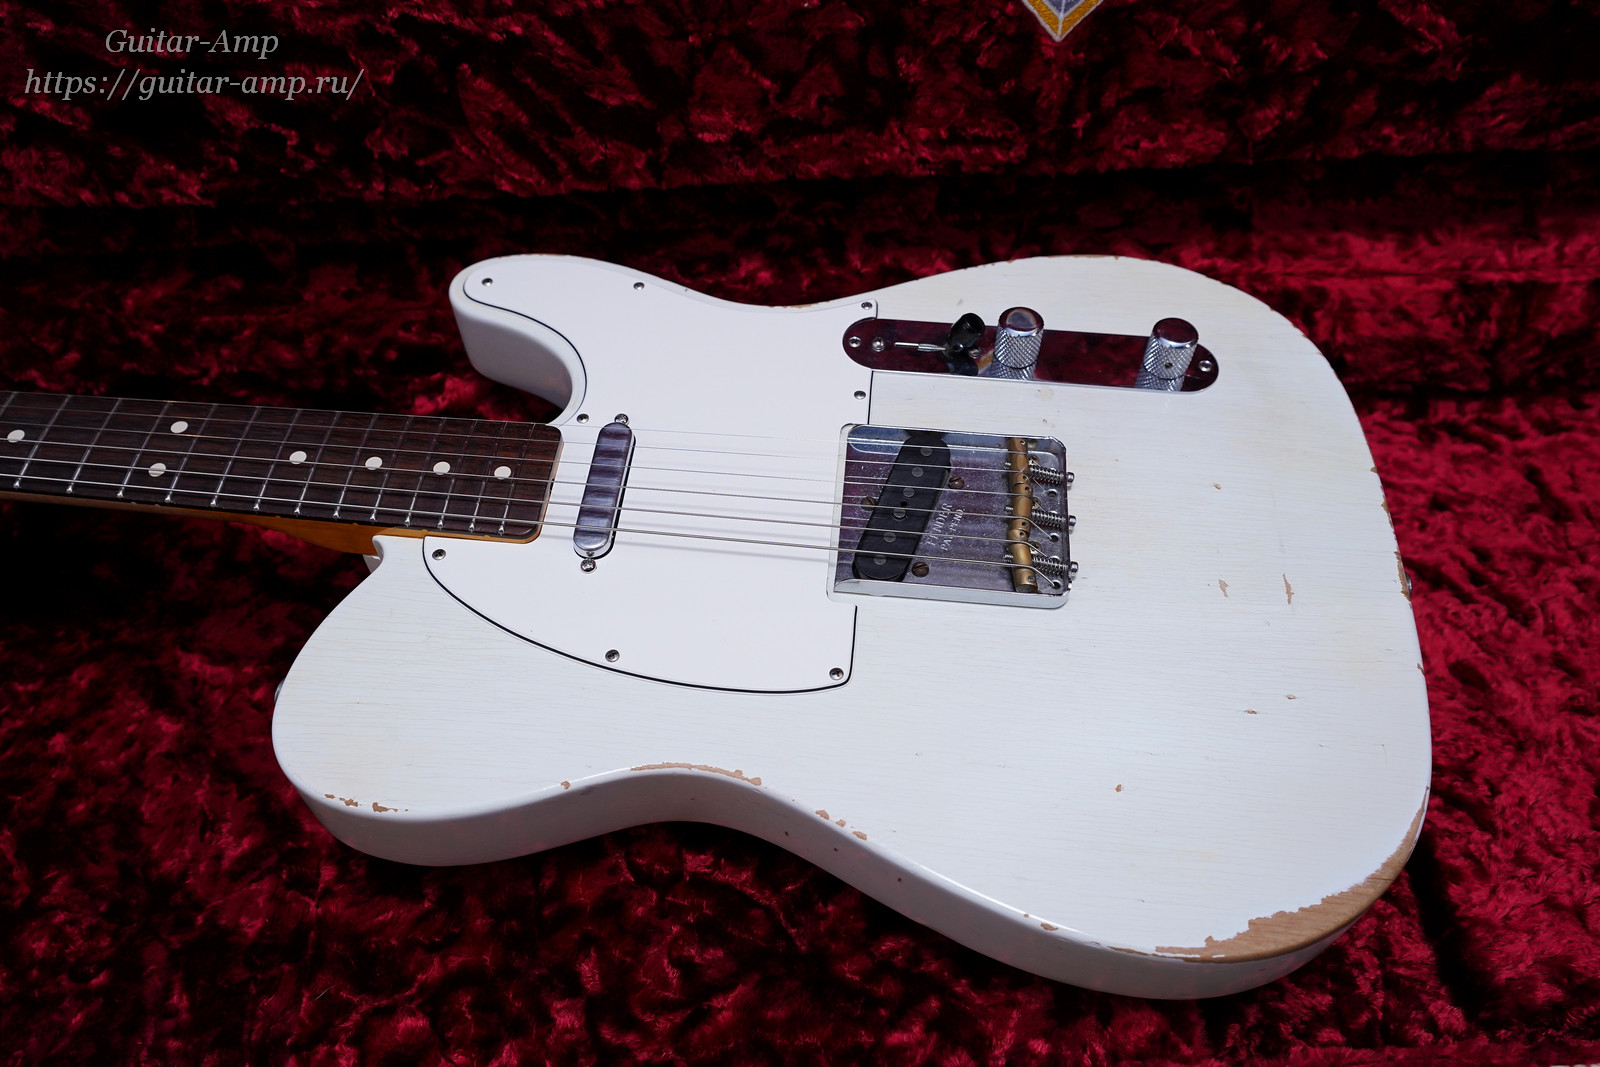 Fender Custom Shop Telecaster 1963 Limited Edition 30th Ann CME Special Run Aged White Relic 2017 23_x1600.jpg